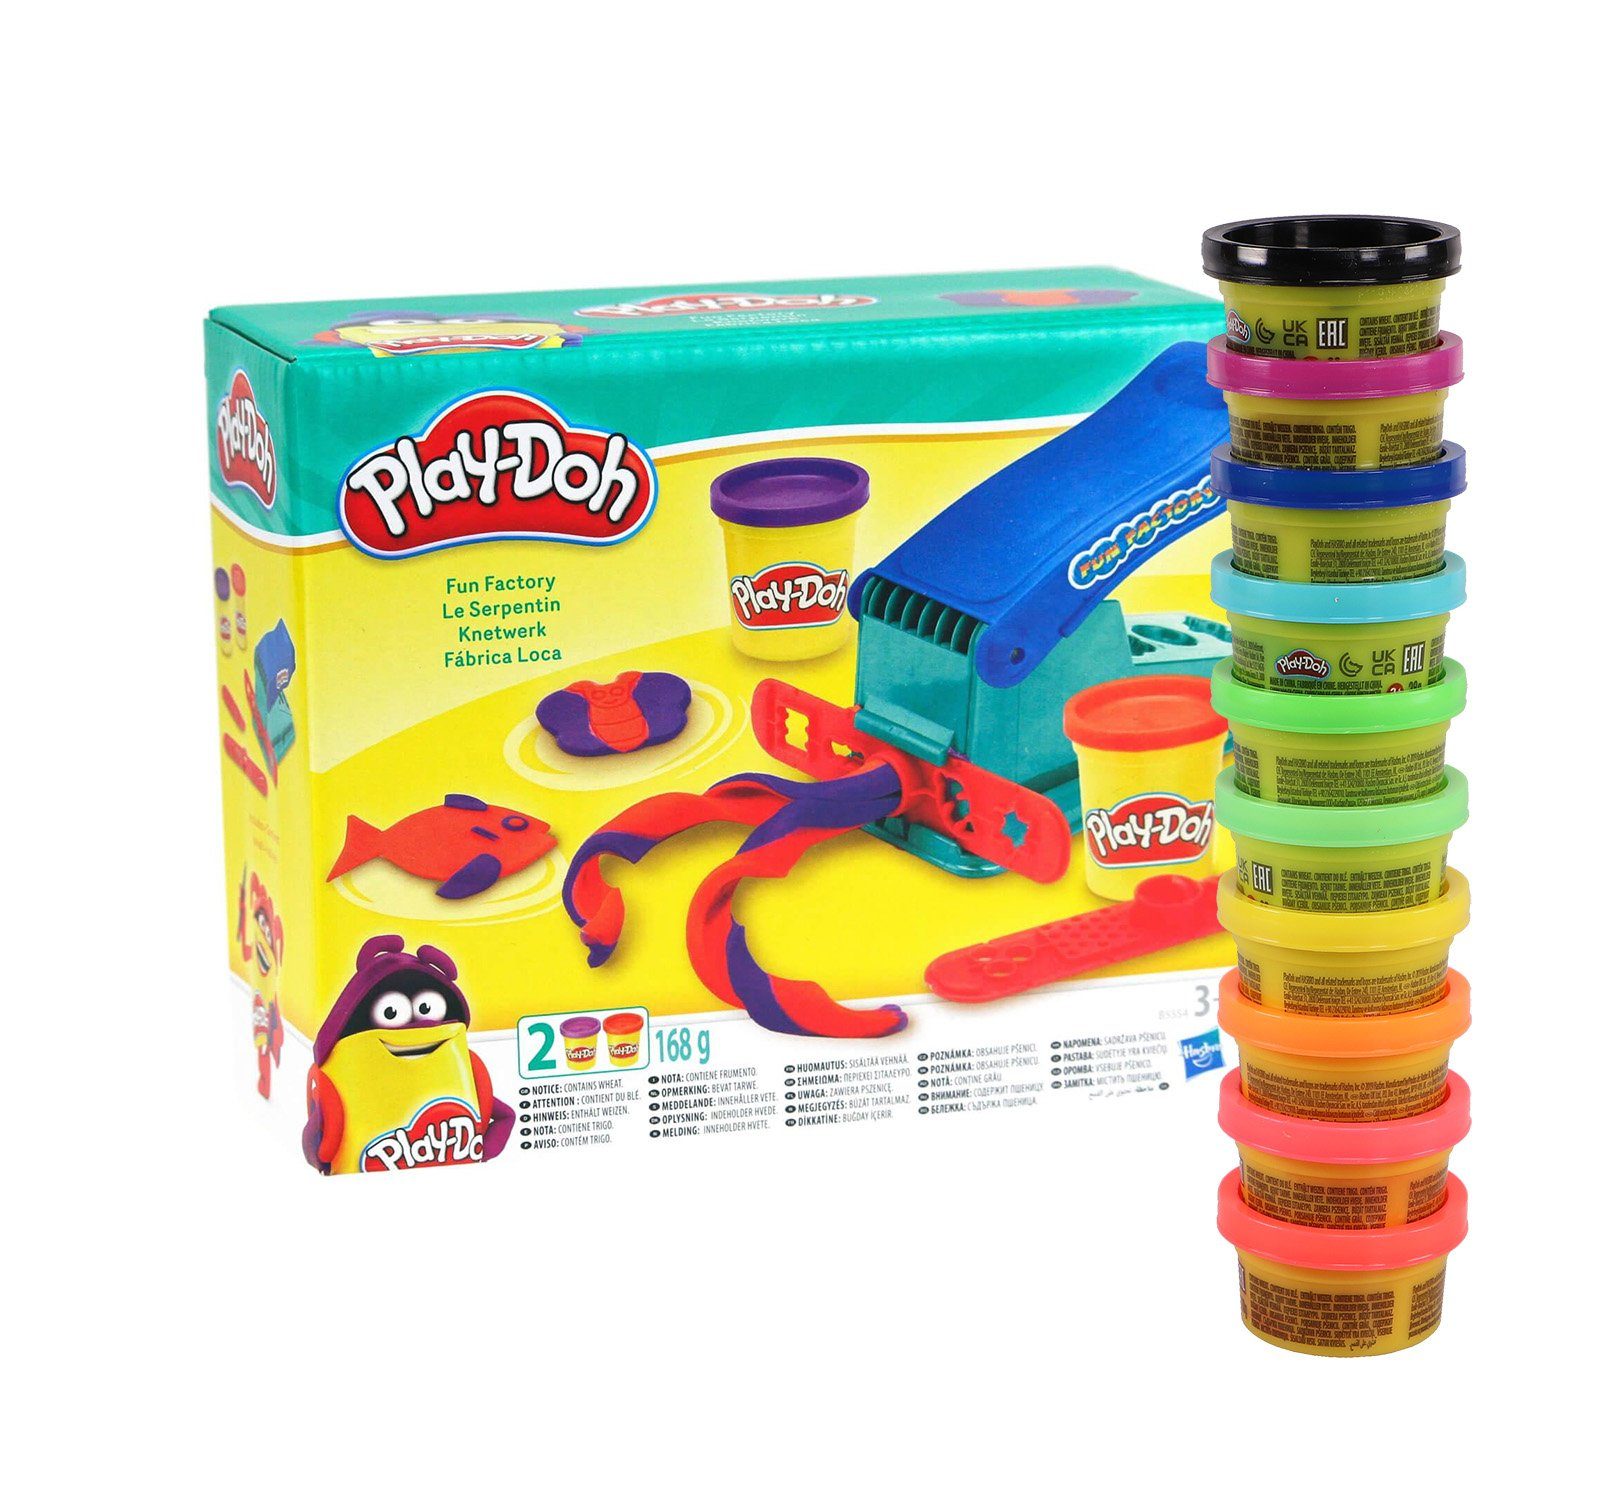 Play-Doh Play-Doh Play-Doh Party Pack mit Knetwerk Fun Factory Knetpresse (448g Play-Doh)